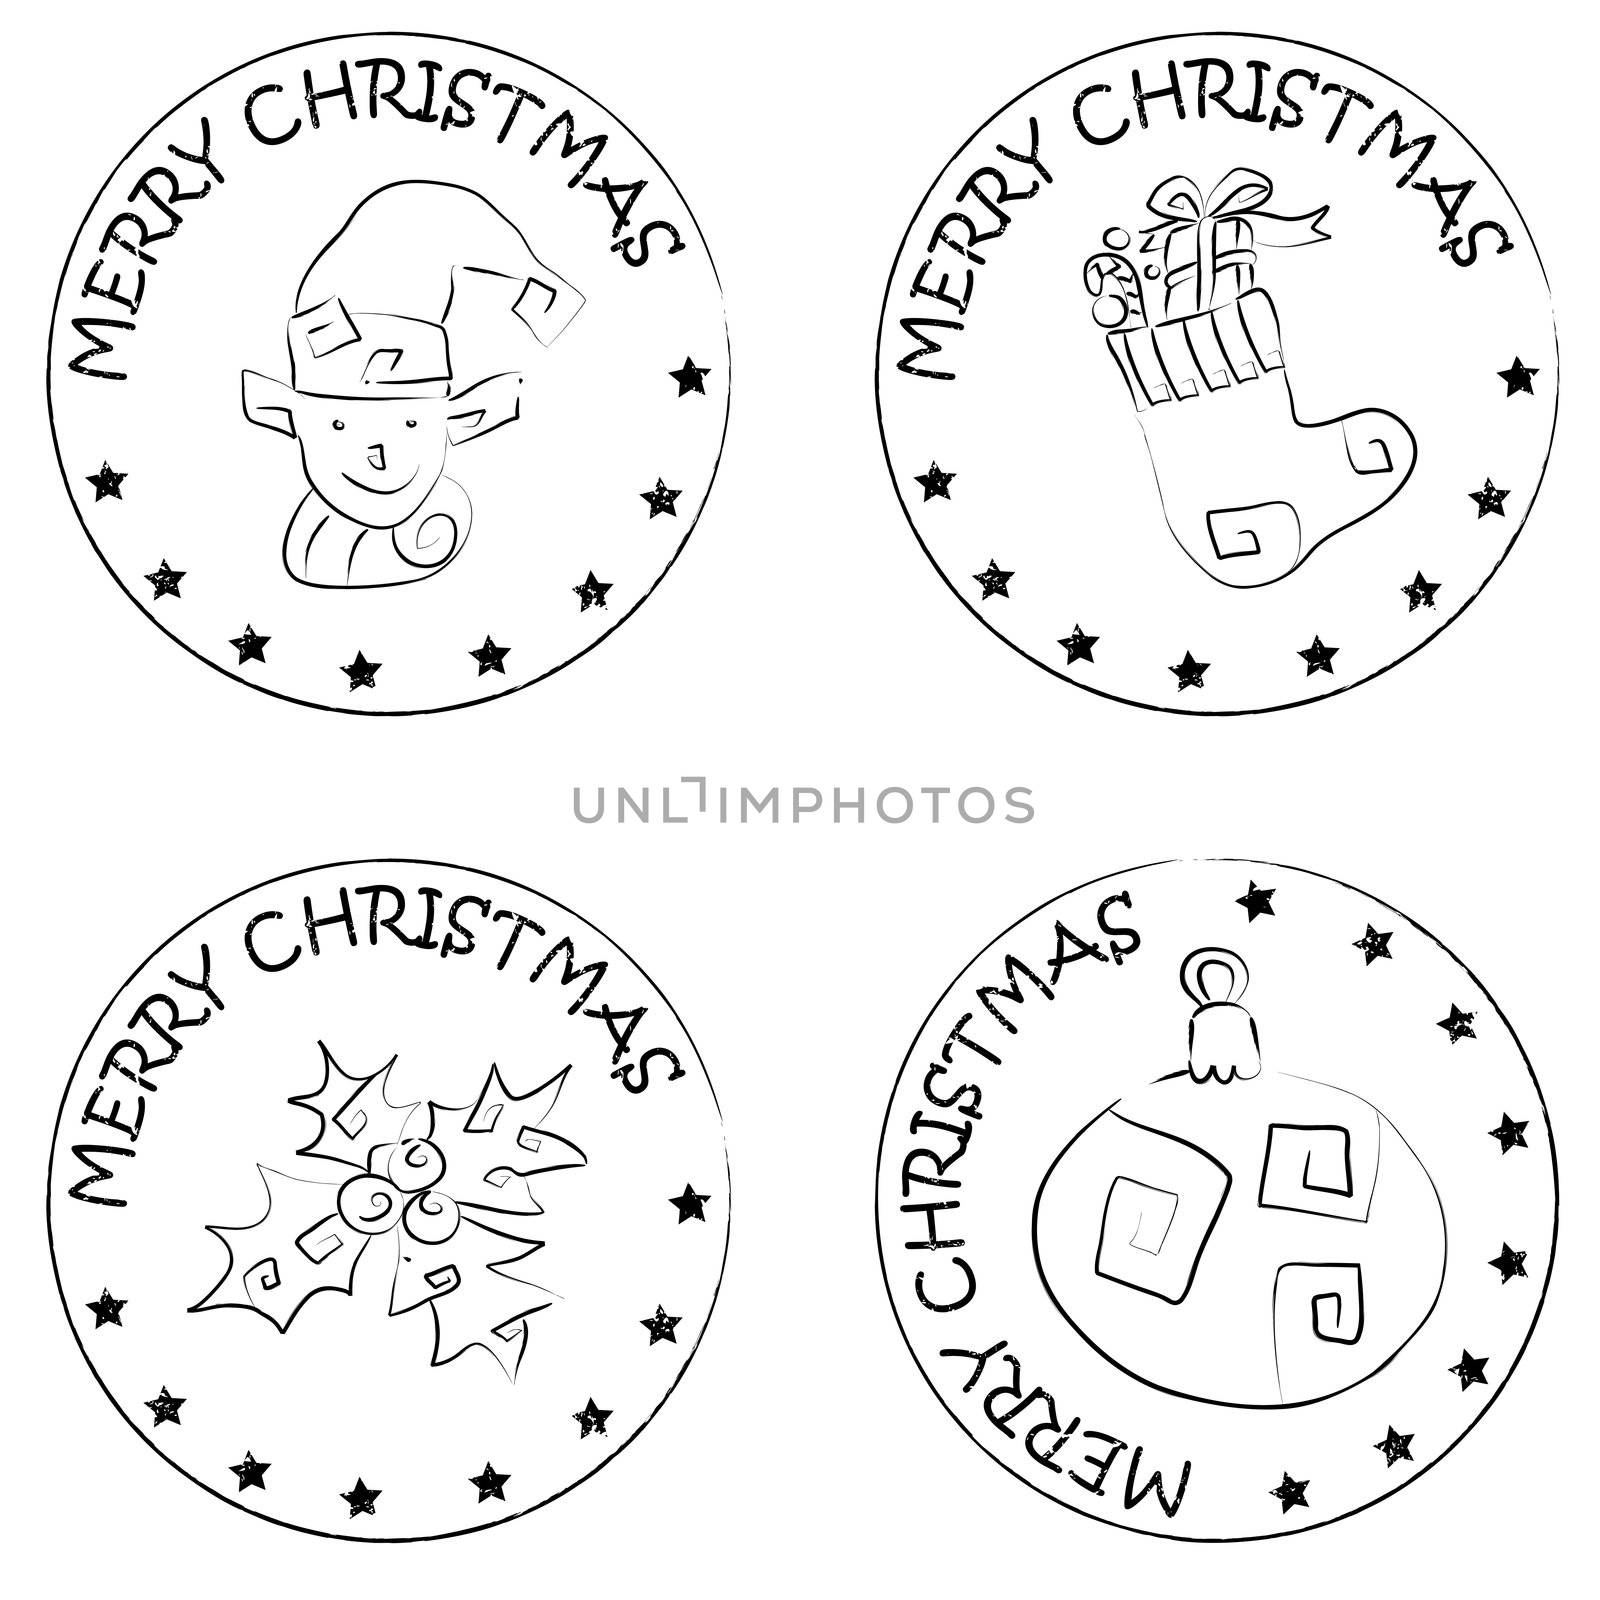 4 christmas coin stamps isolated on white with stars and merry christmas text, sock with gifts, globe, holly berry, elf